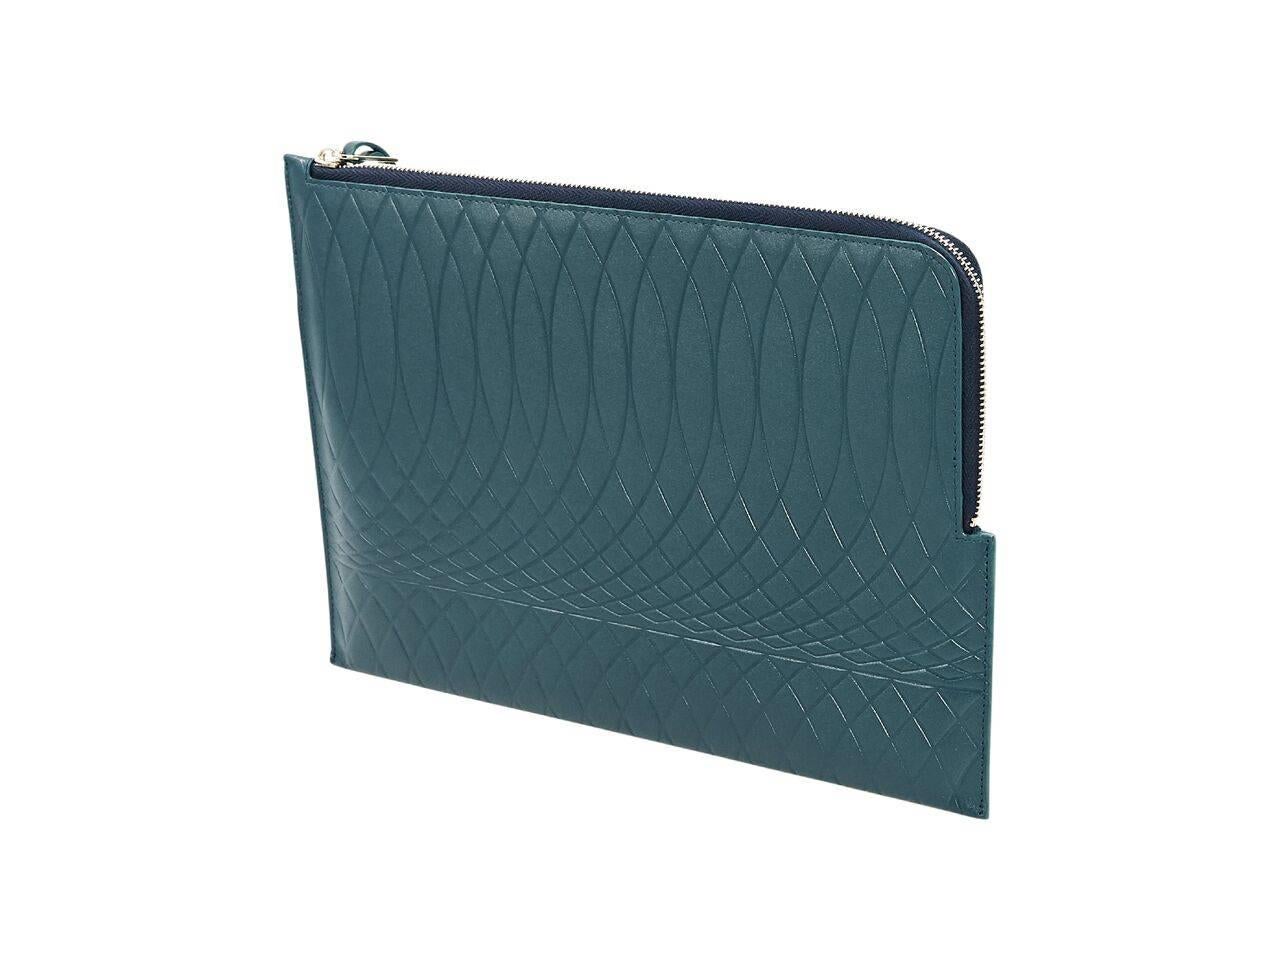 Product details:  Teal leather embossed pouch by Paul Smith.  Top zip closure.  Lined interior.  Silvertone hardware.  11